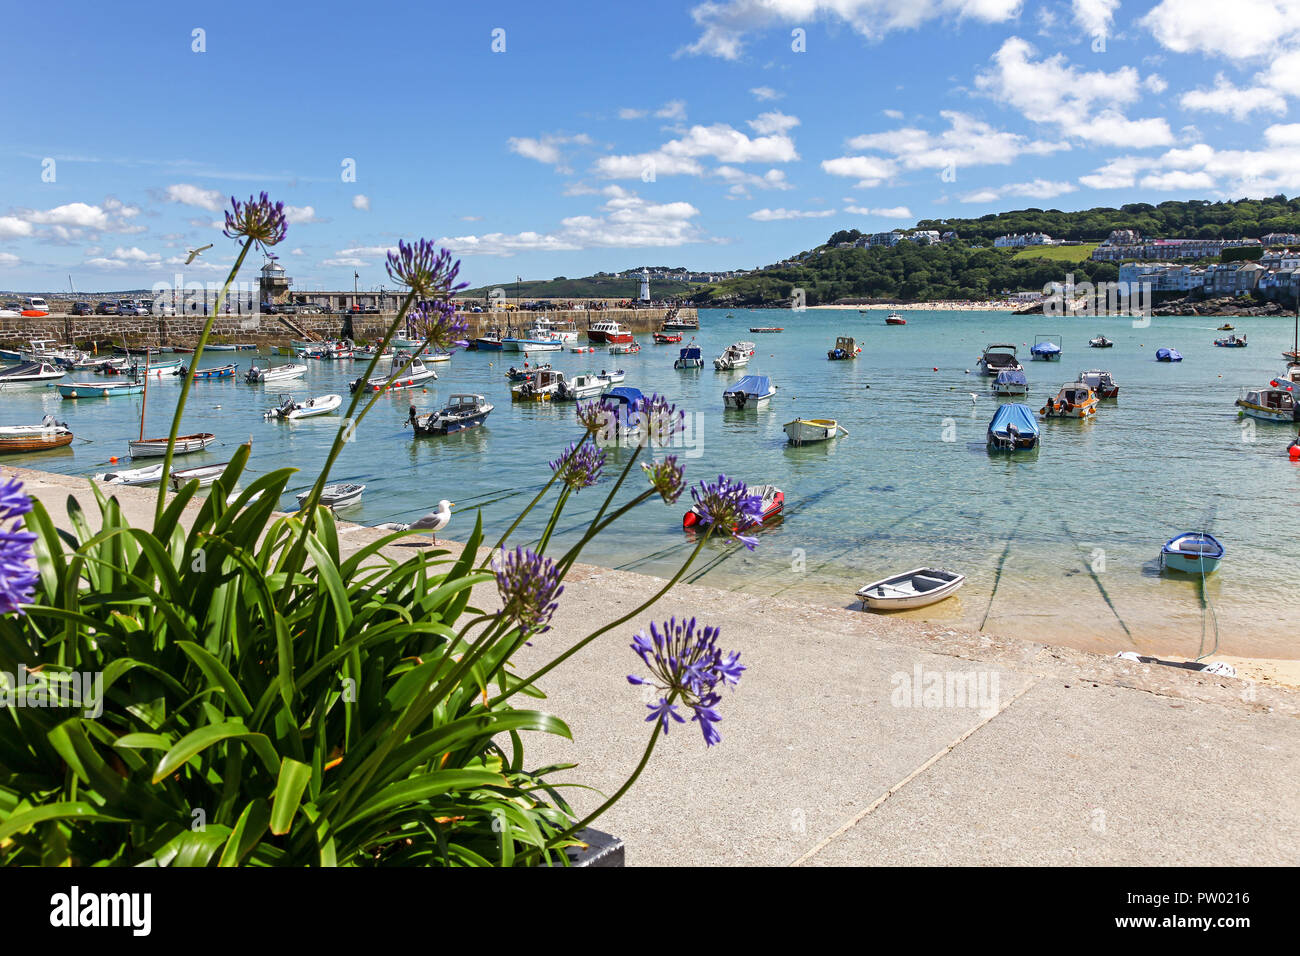 Agapanthus flowers on St. Ives Harbour, St. Ives, Cornwall, England, UK Stock Photo